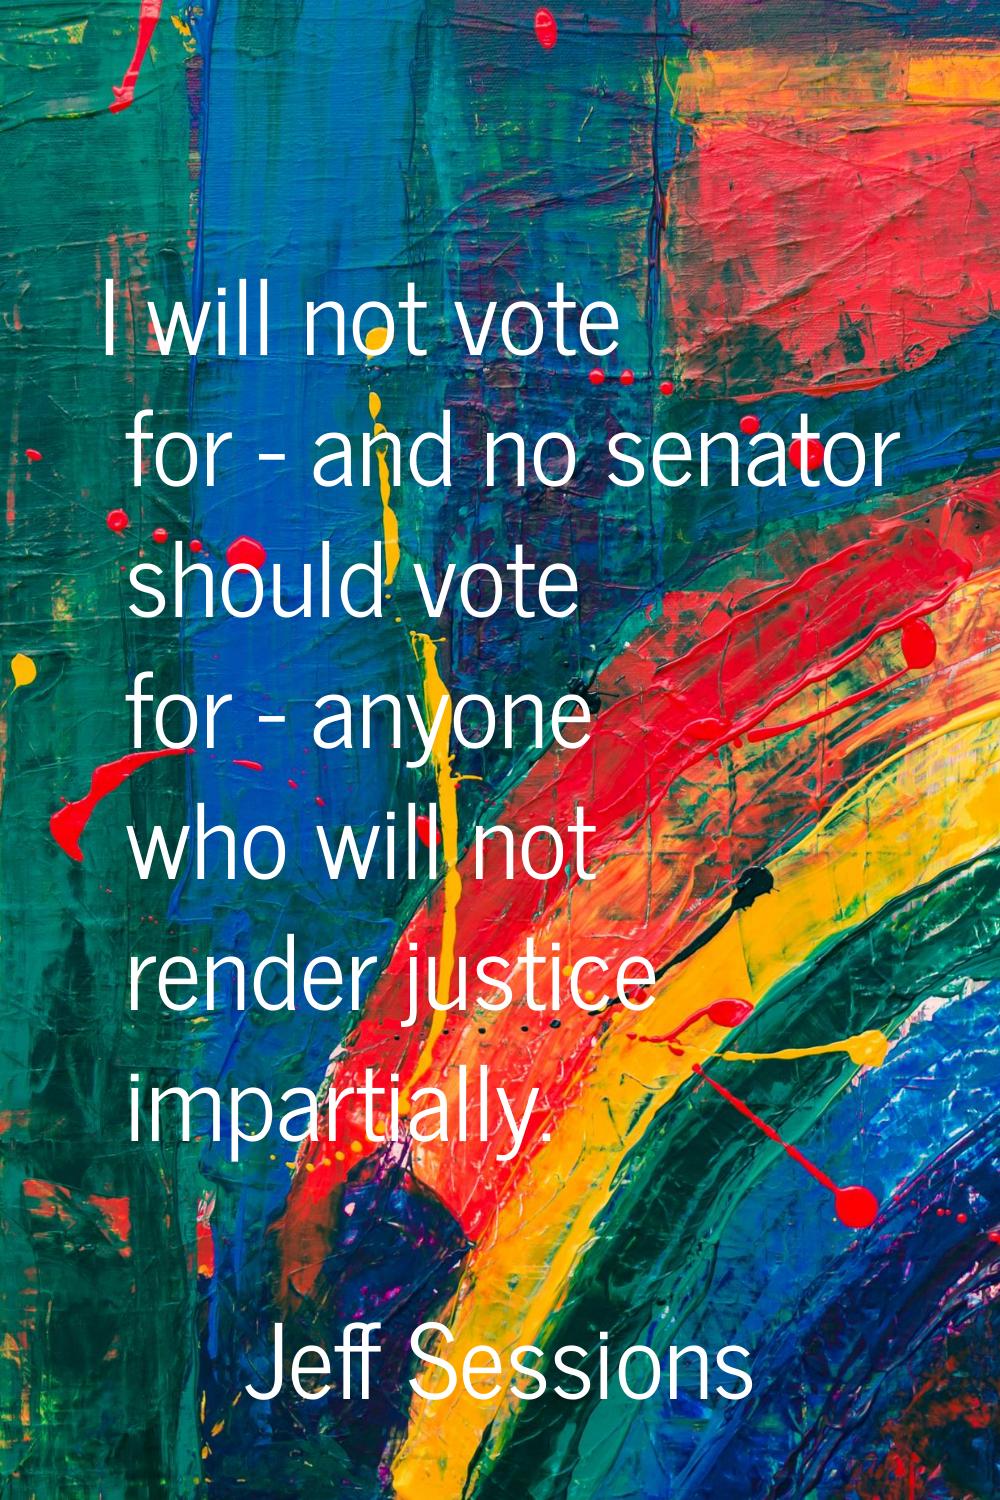 I will not vote for - and no senator should vote for - anyone who will not render justice impartial